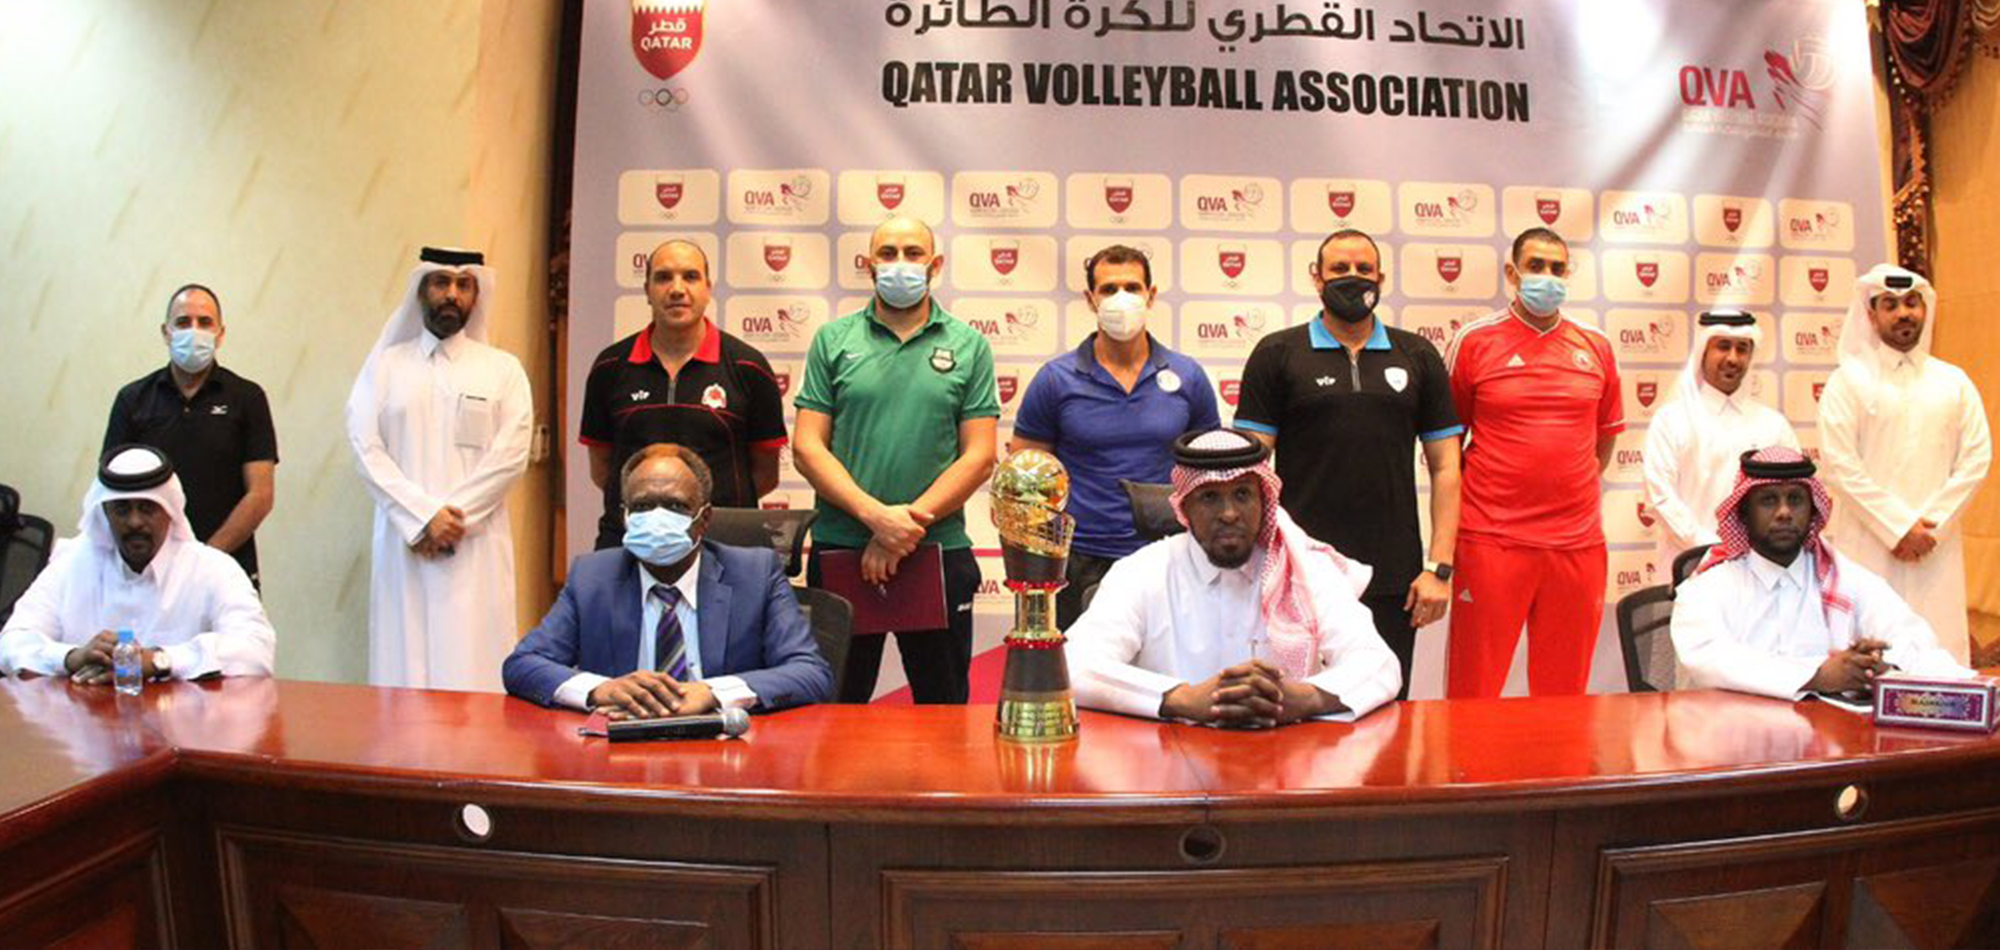 The QVA announce the dates and schedule for the 2019/2020 Qatar Cup and HH The Amir Cup for Volleyball